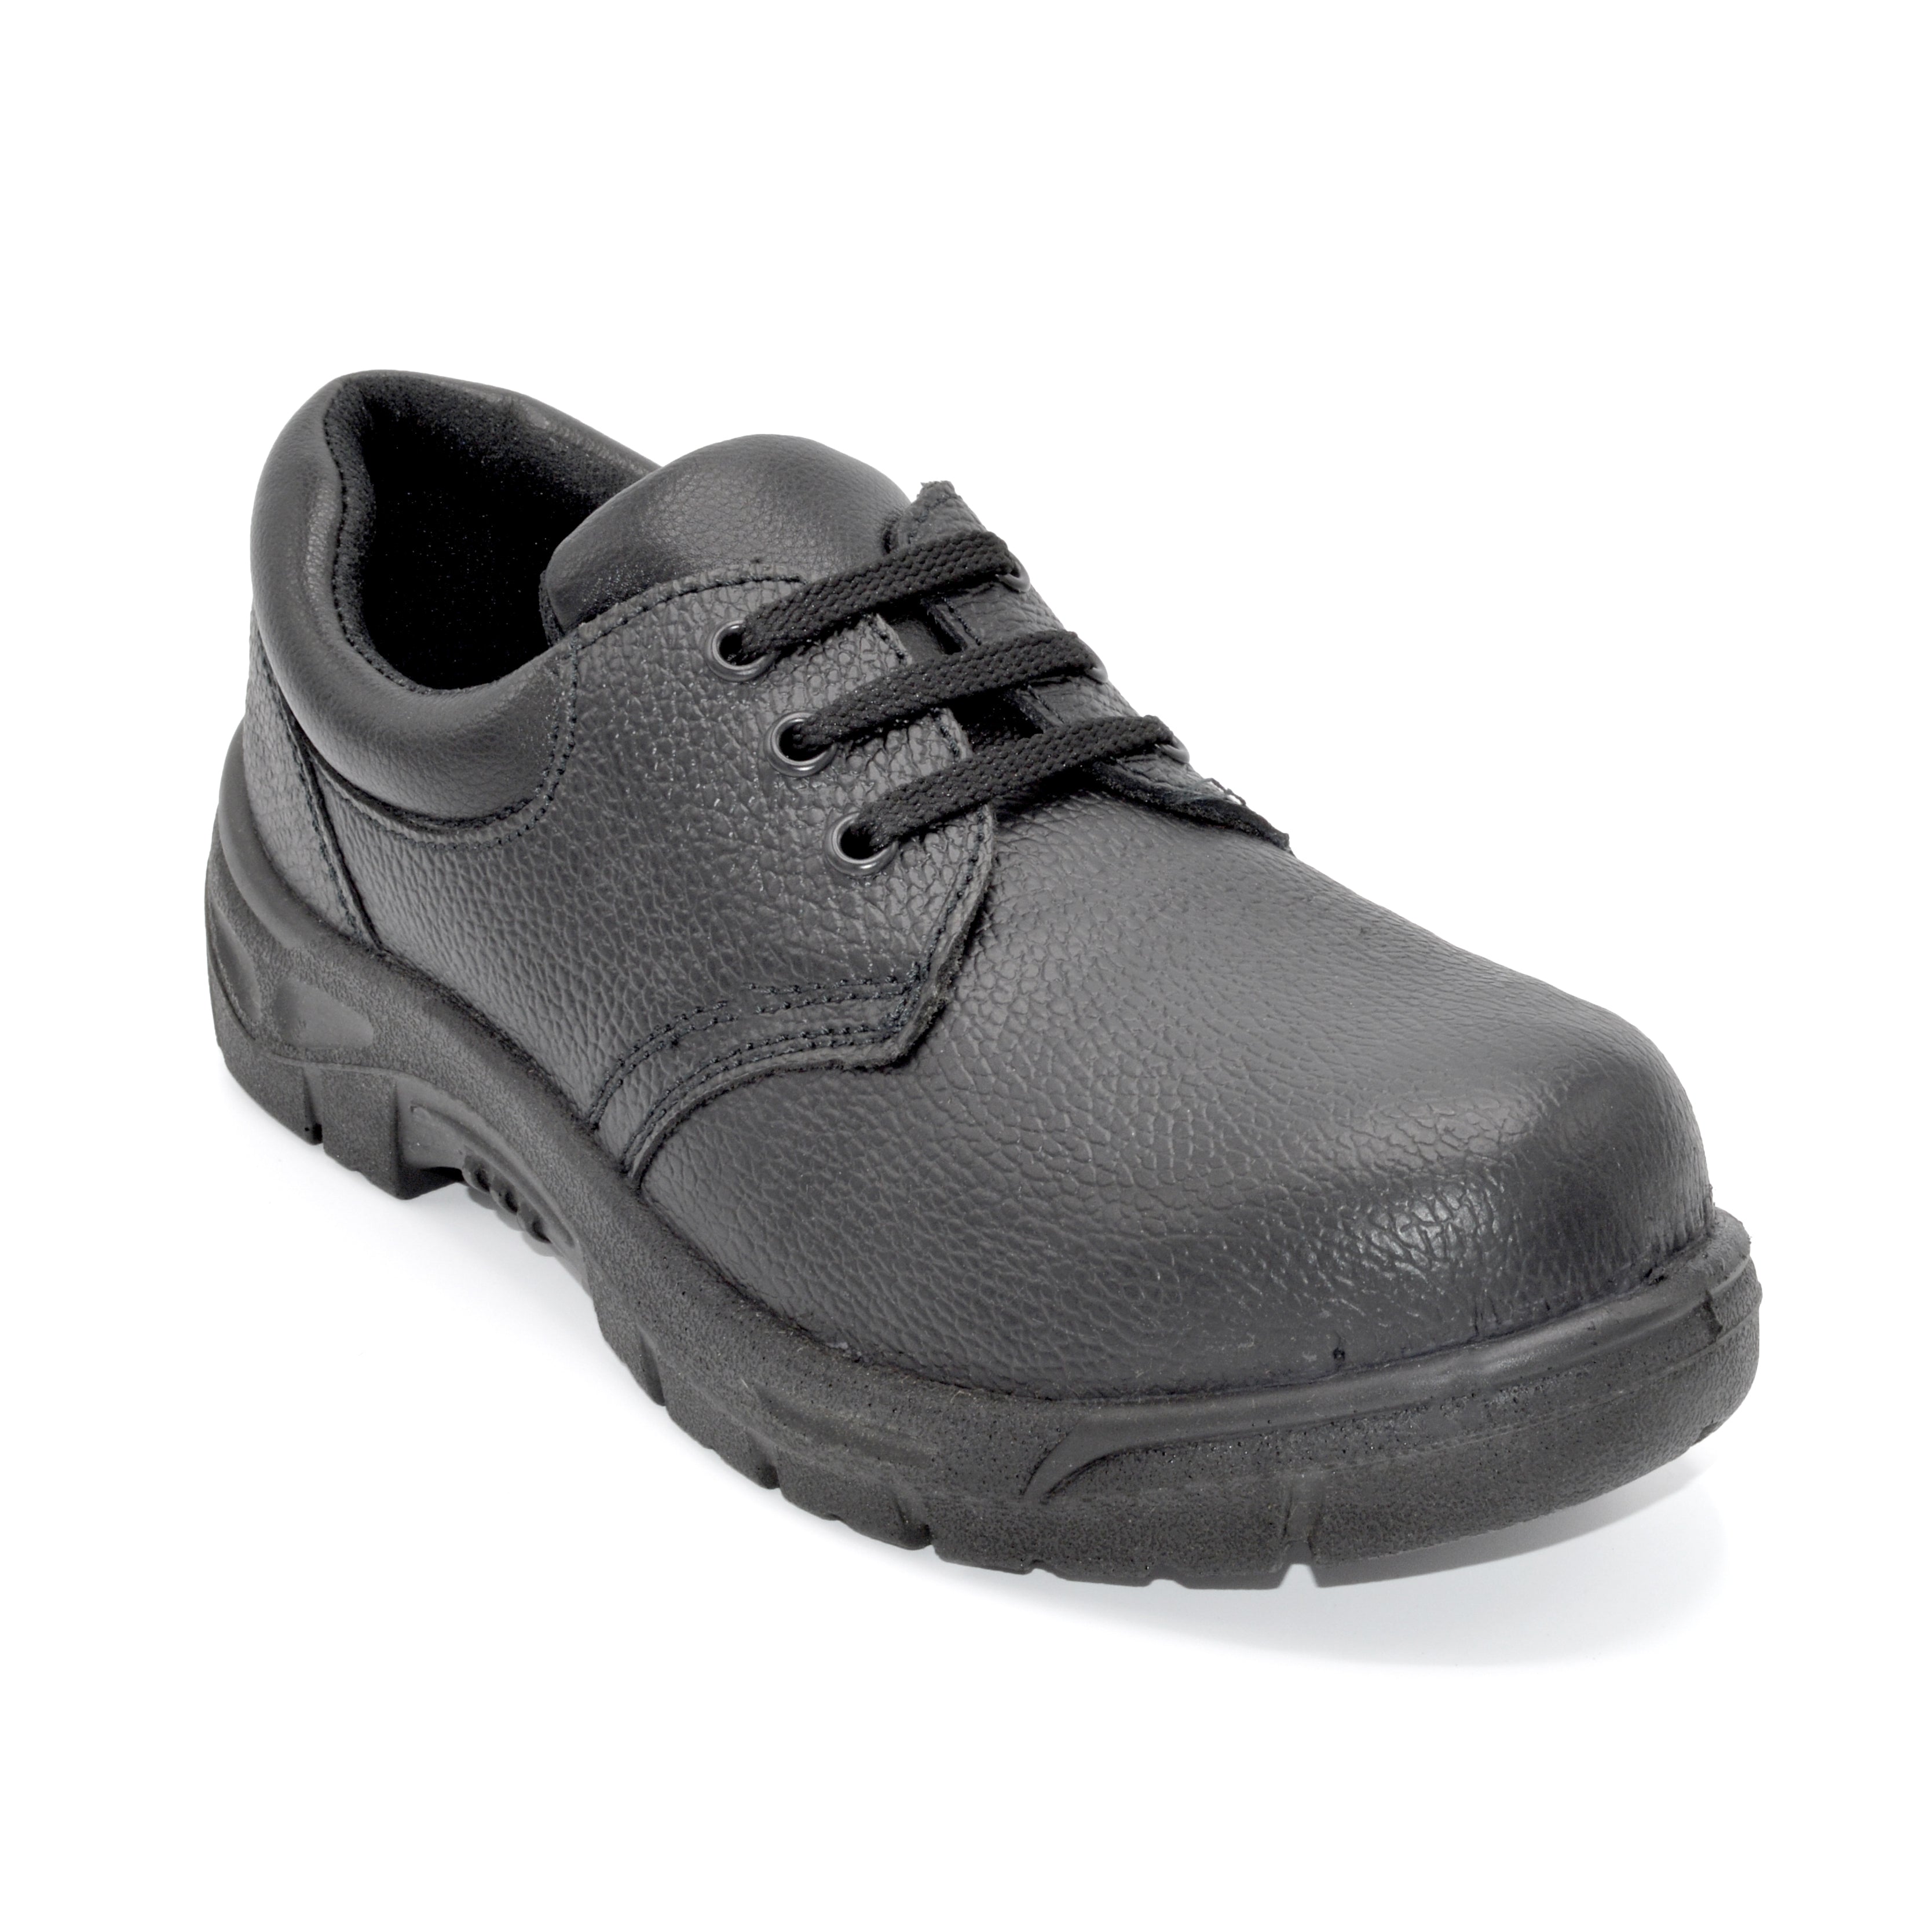 Unisex Lightweight Safety Shoe With Padded Collar